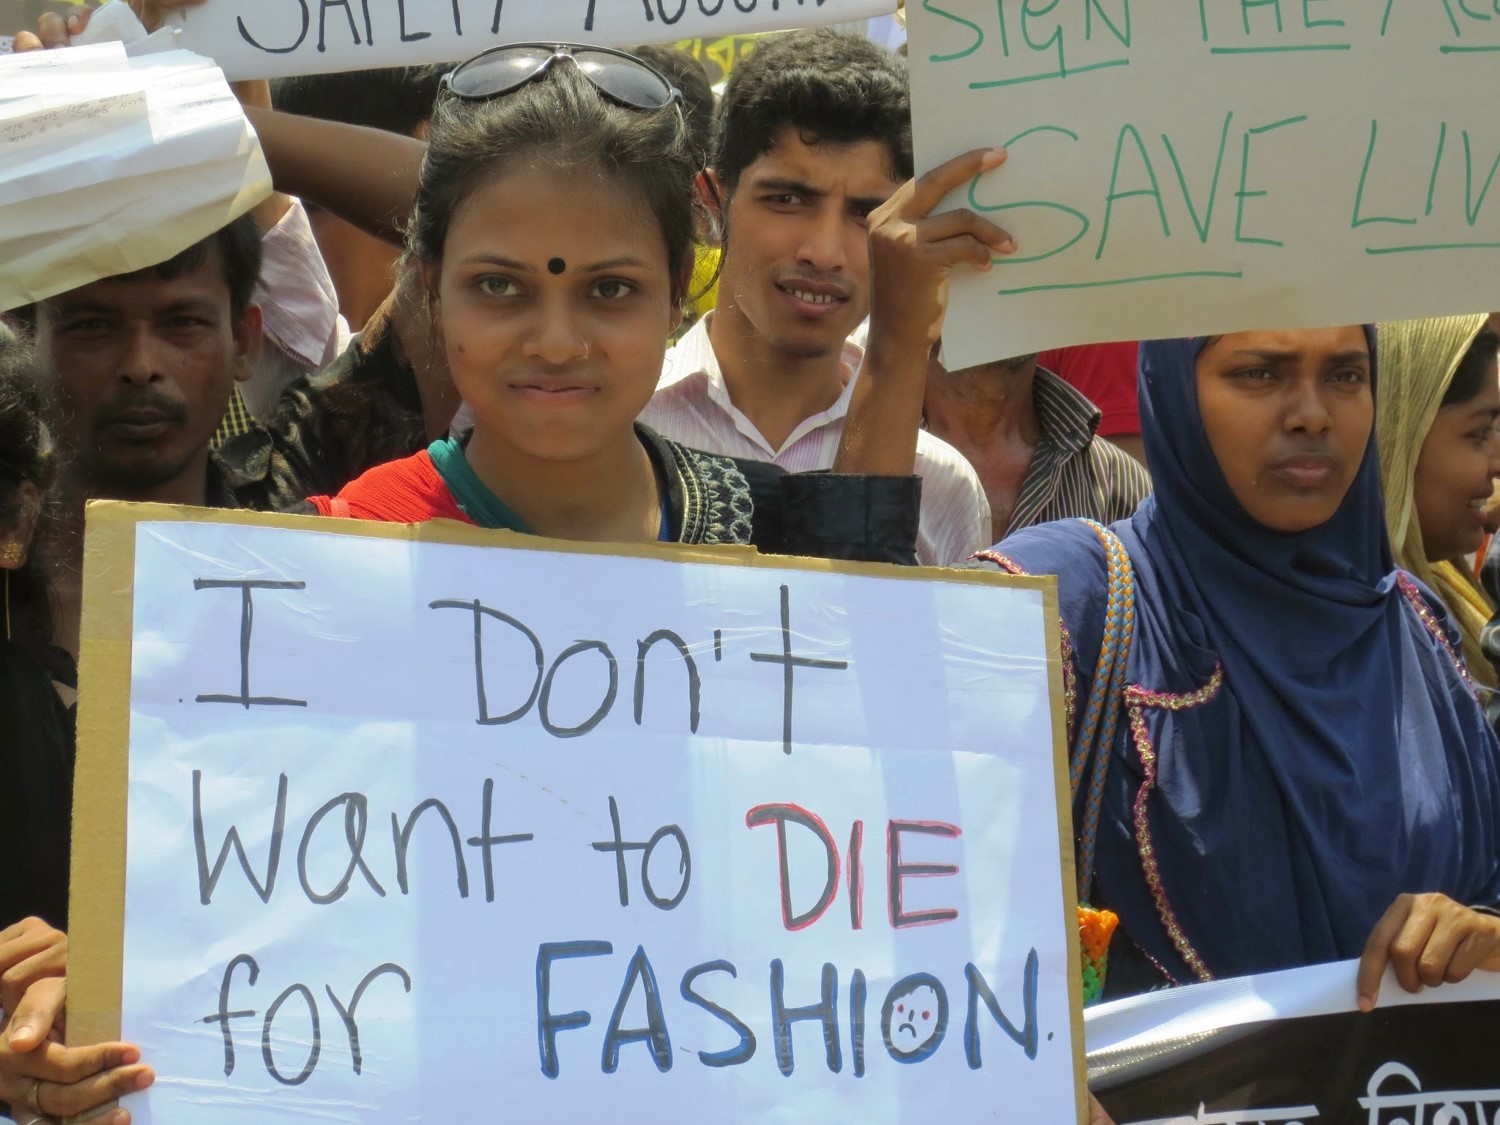 Workers and unions rallied on the one-year anniversary of the Rana Plaza collapse (Solidarity Center/Flickr/CC BY-ND 2.0)